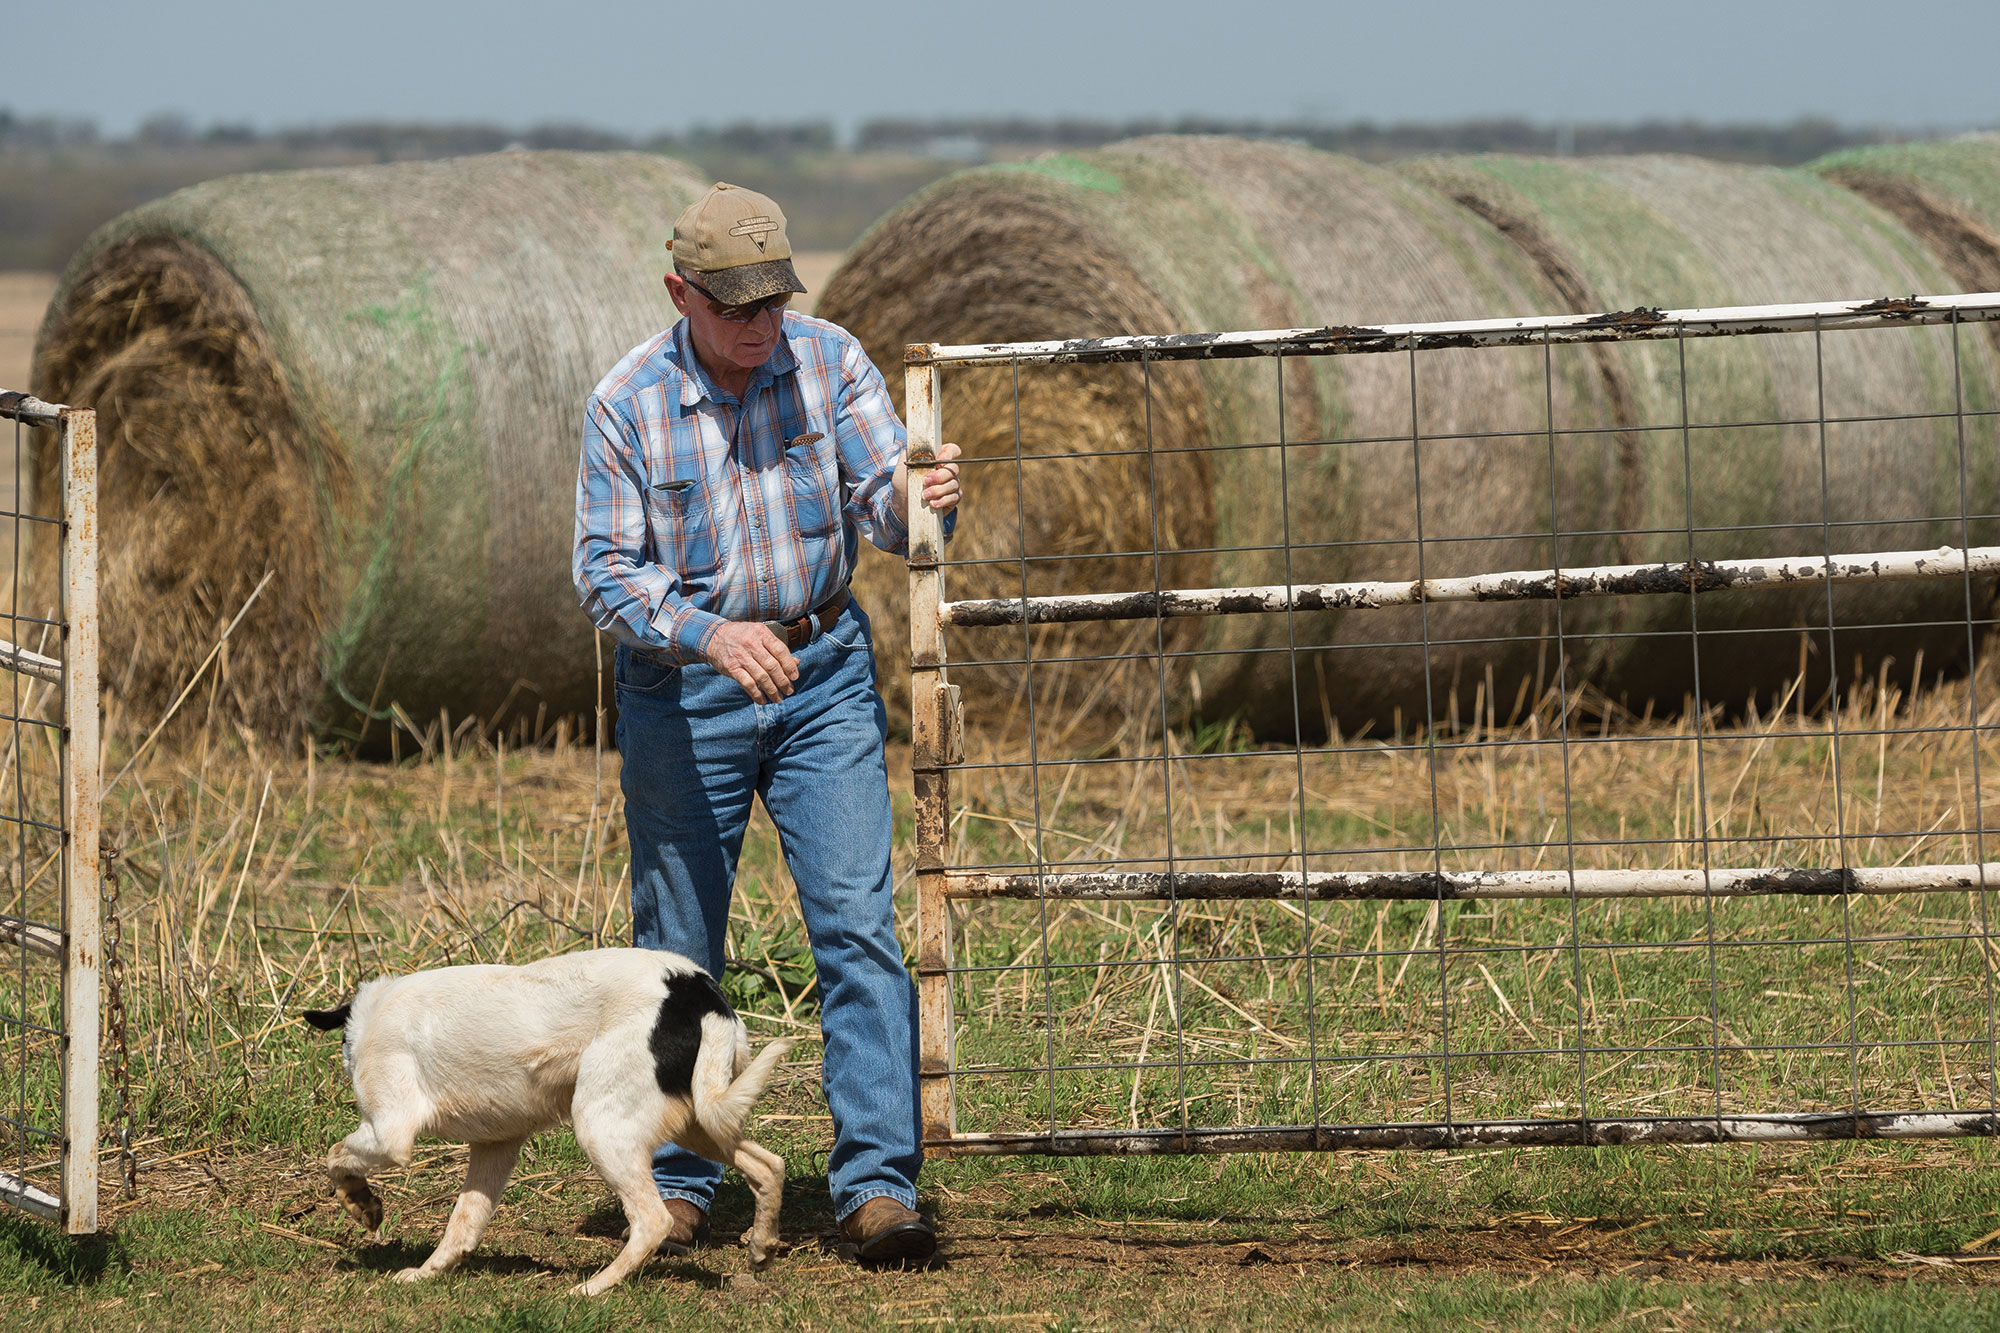 Lee Wayne Stepp and his border collie, Abbie, check cattle. Abbie works alongside Stepp, who has trained her from a puppy.